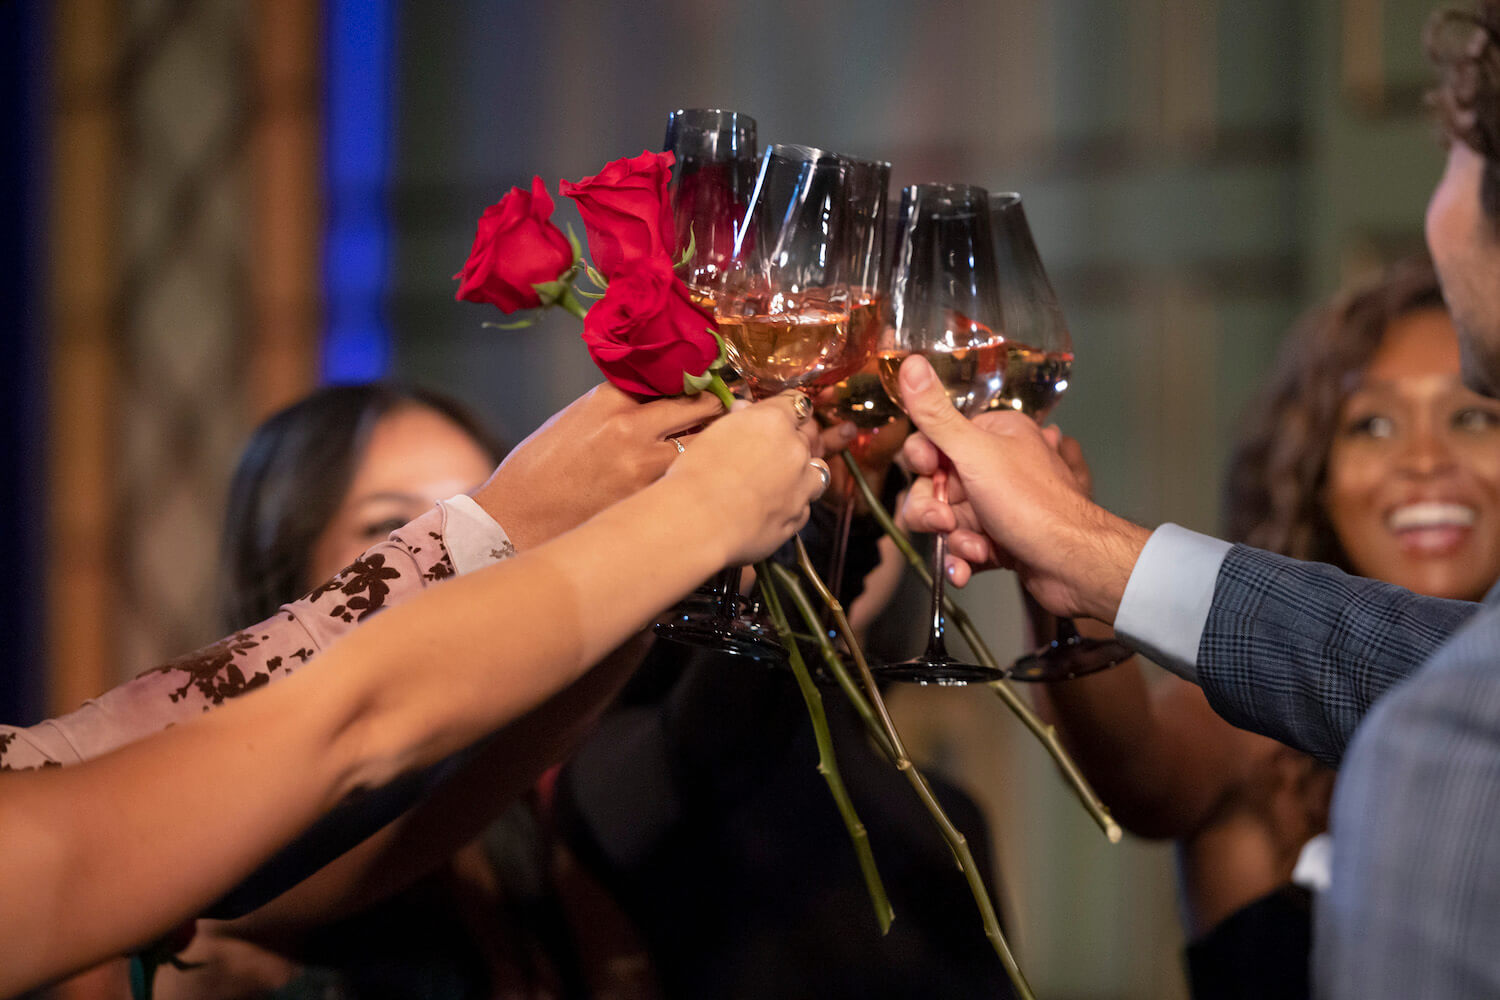 Joey Graziadei and his final cast members toasting with wine glasses and roses in 'The Bachelor' Season 28